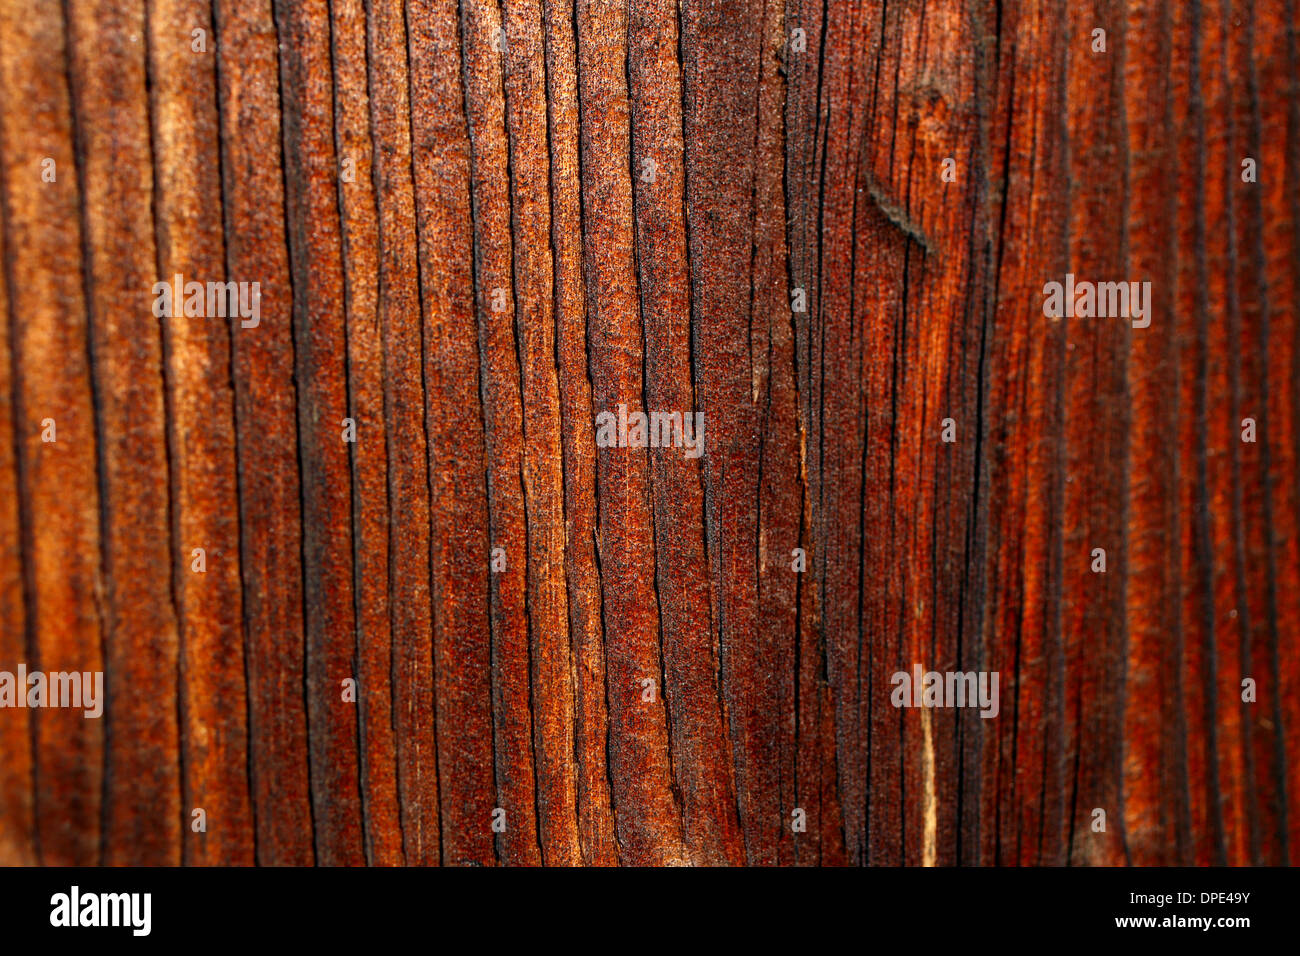 Natural details of sun dried wood of a 100 years old barn Stock Photo